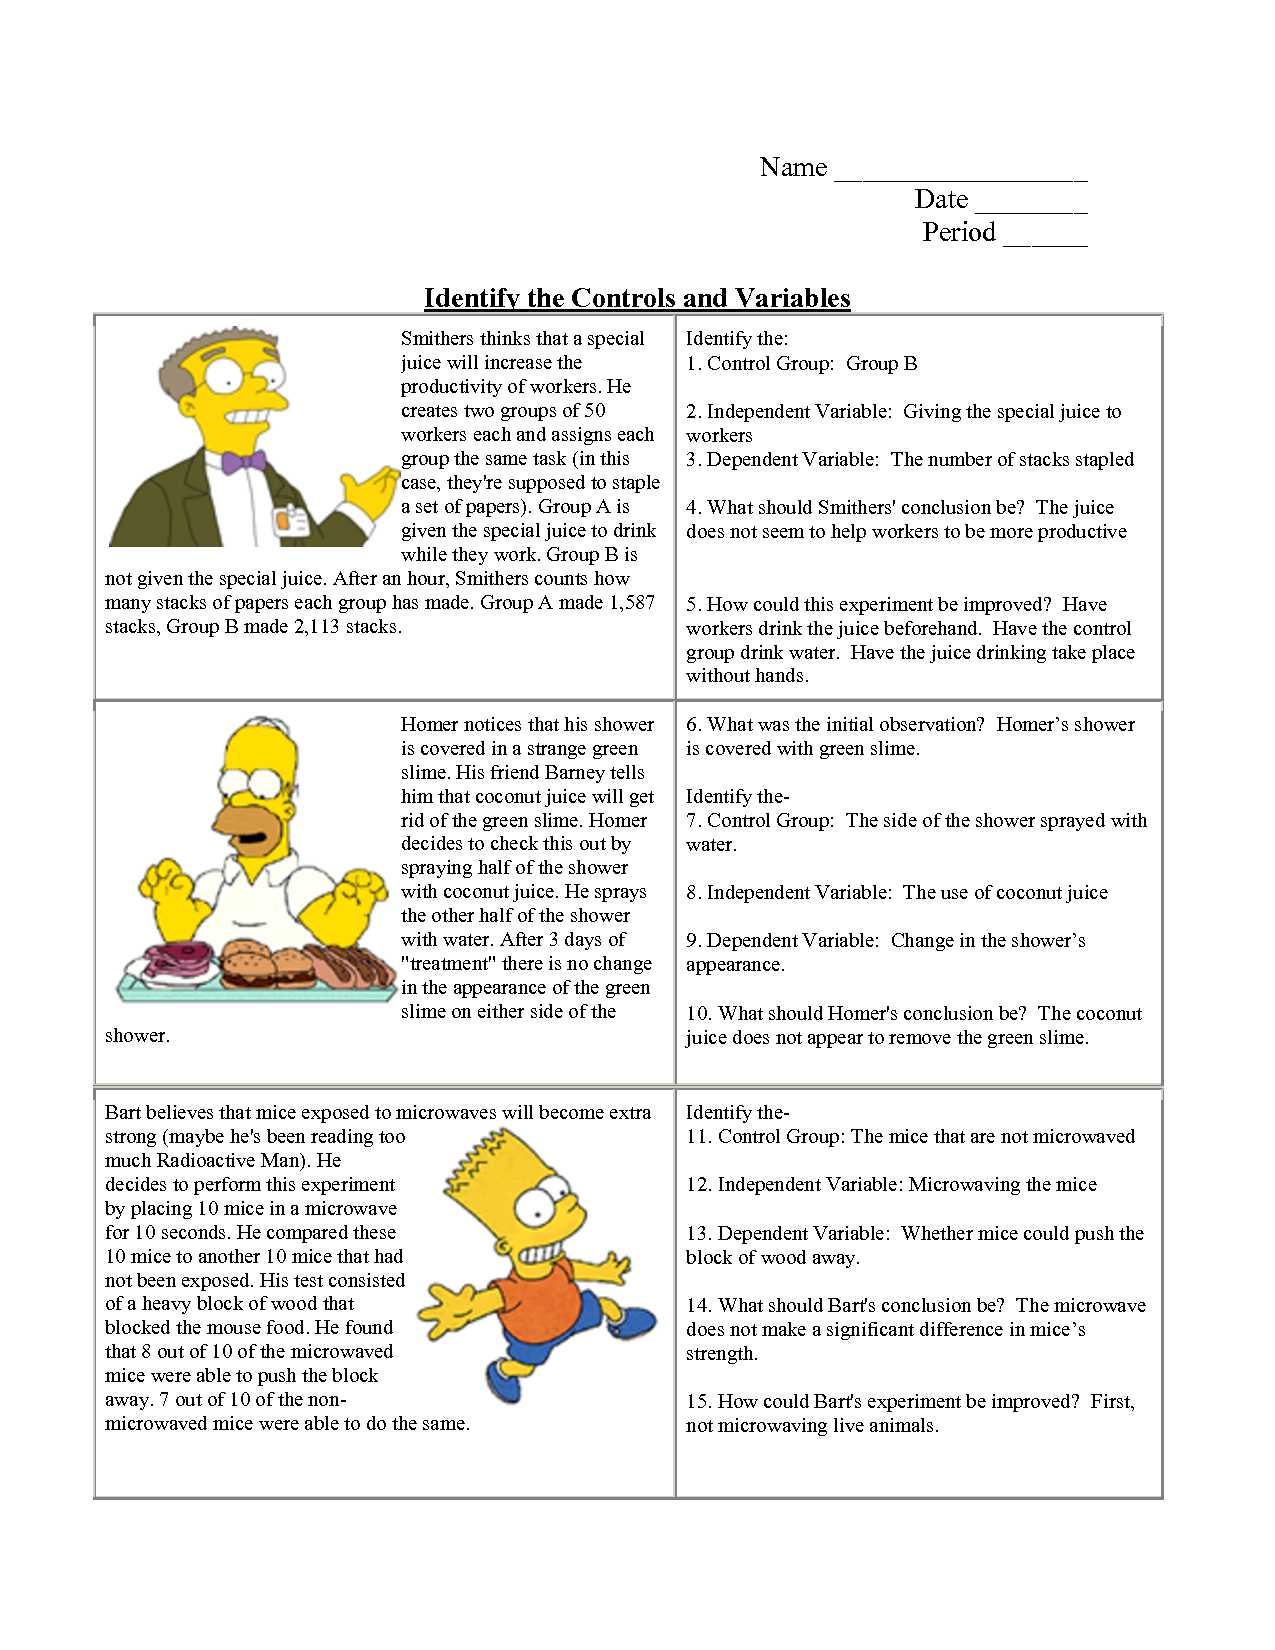 Scientific Inquiry Worksheet Answers as Well as Scientific Method Worksheet Abedcdbaccabadbe Jpg Heres A Cut and